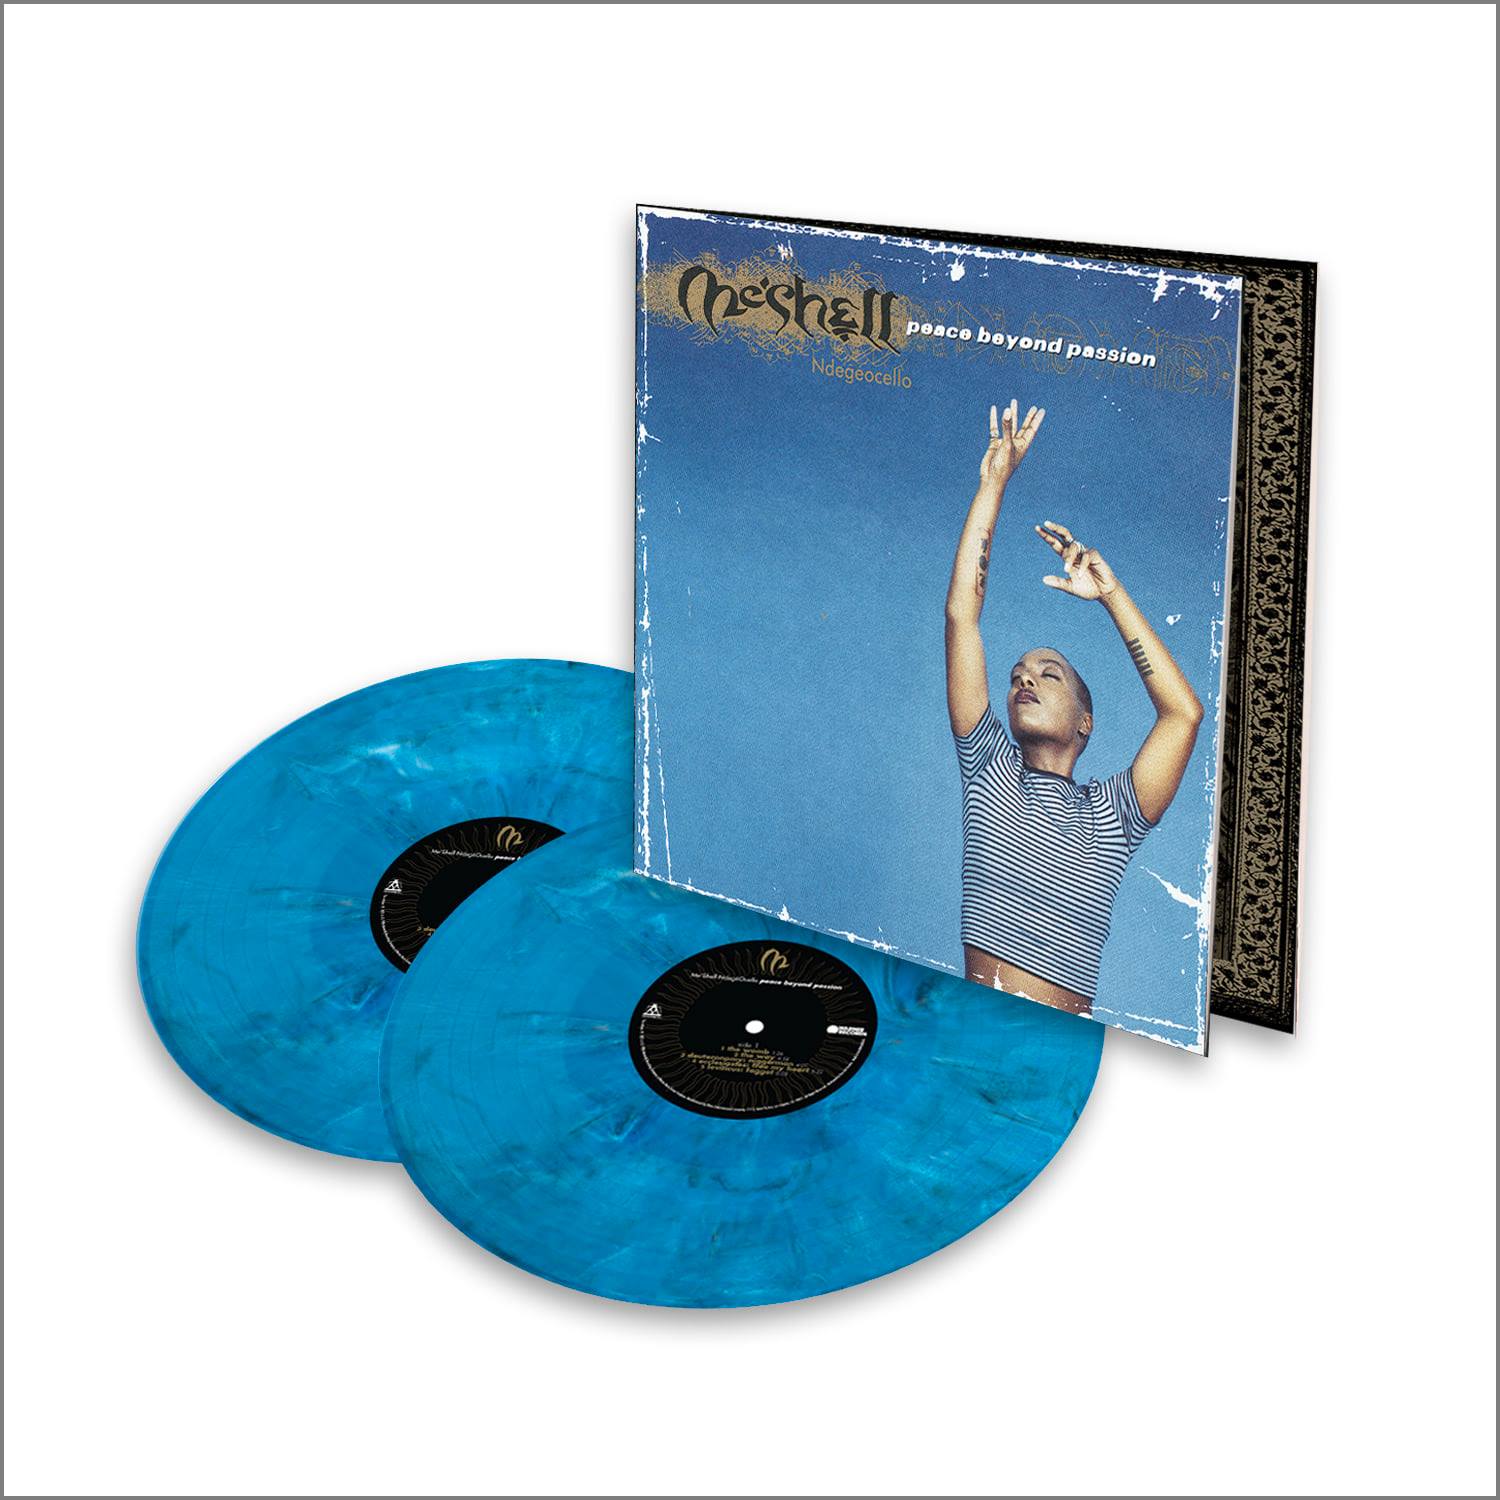 MESHELL NDEGEOCELLO - Peace Beyond Passion (+ Bonus Tracks) - 2LP - Crystal Clear, Solid Silver & Solid Blue Mixed Vinyl [RSD2021-JUN12]